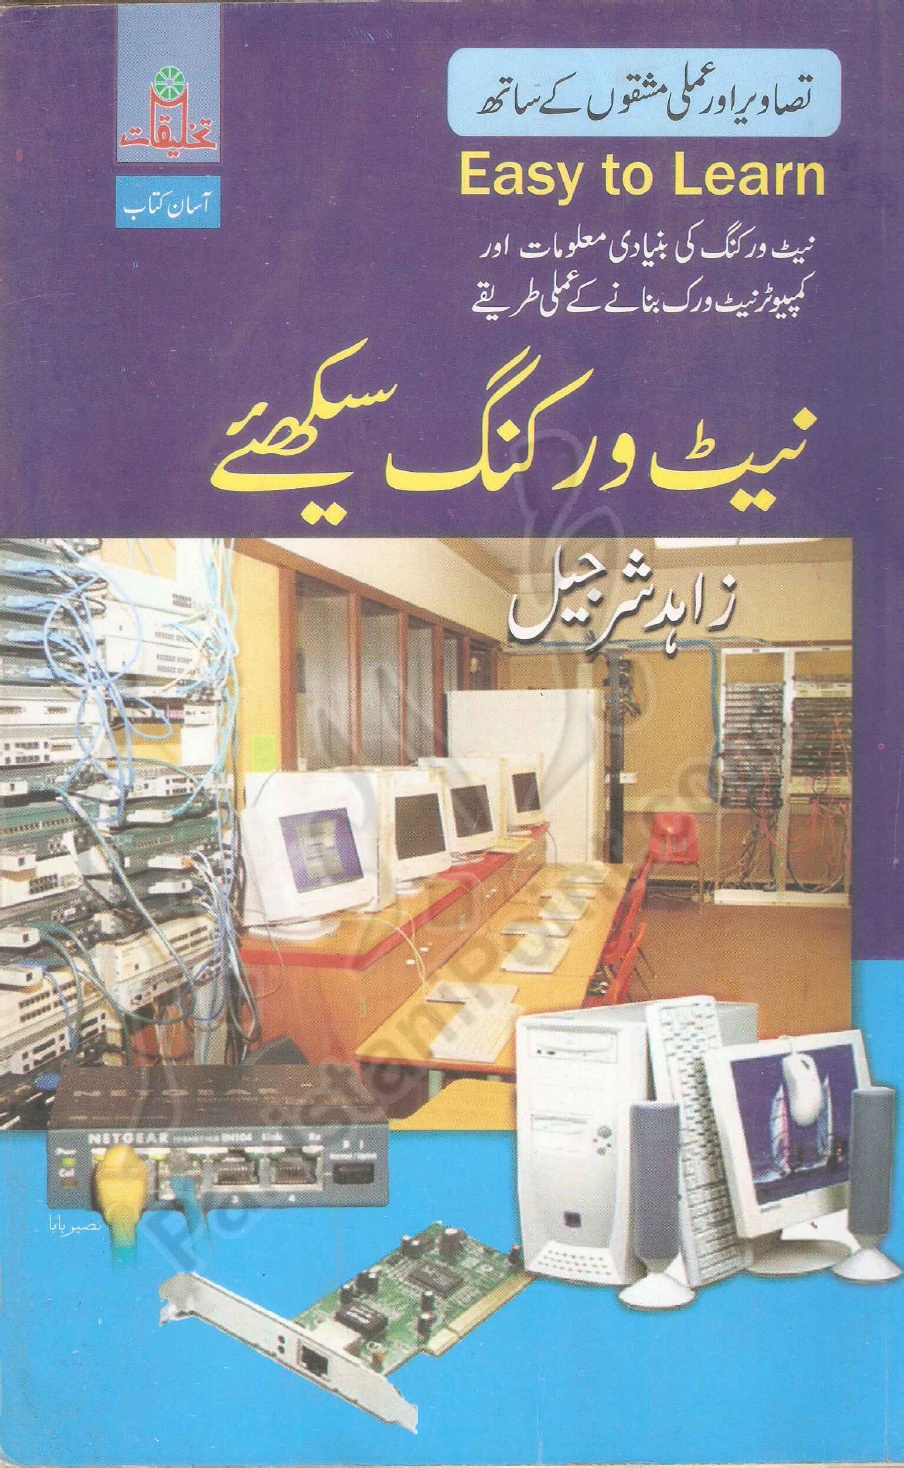 Learn About Networking by Zahid Sharjeel download pdf